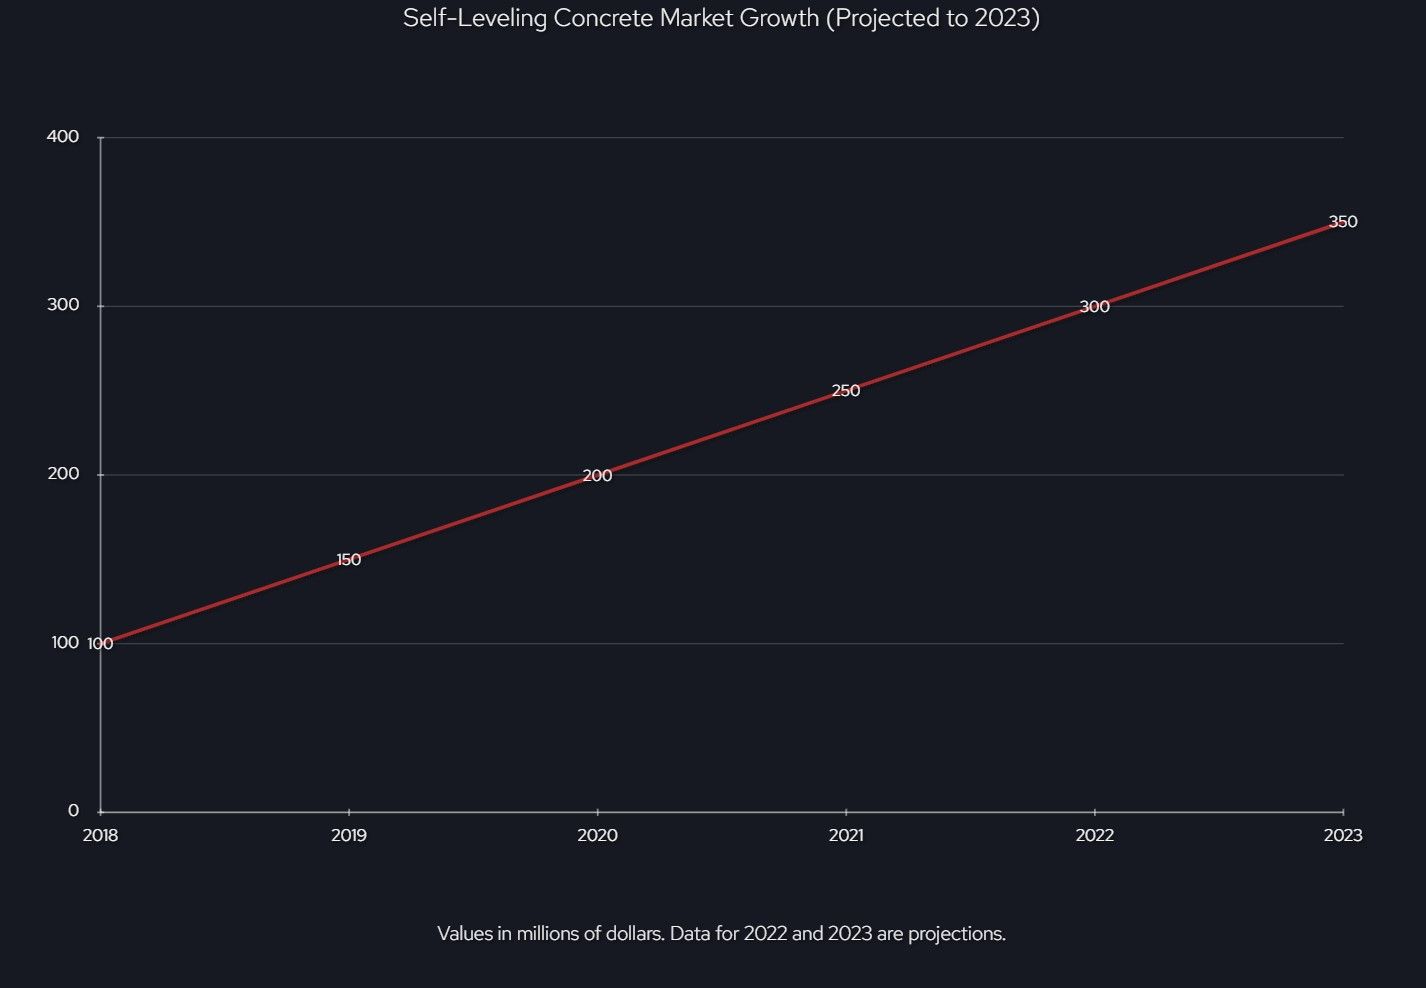 updated line chart illustrating the growth in the market for self-leveling concrete from 2018 to 2023, including projections for 2022 and 2023: